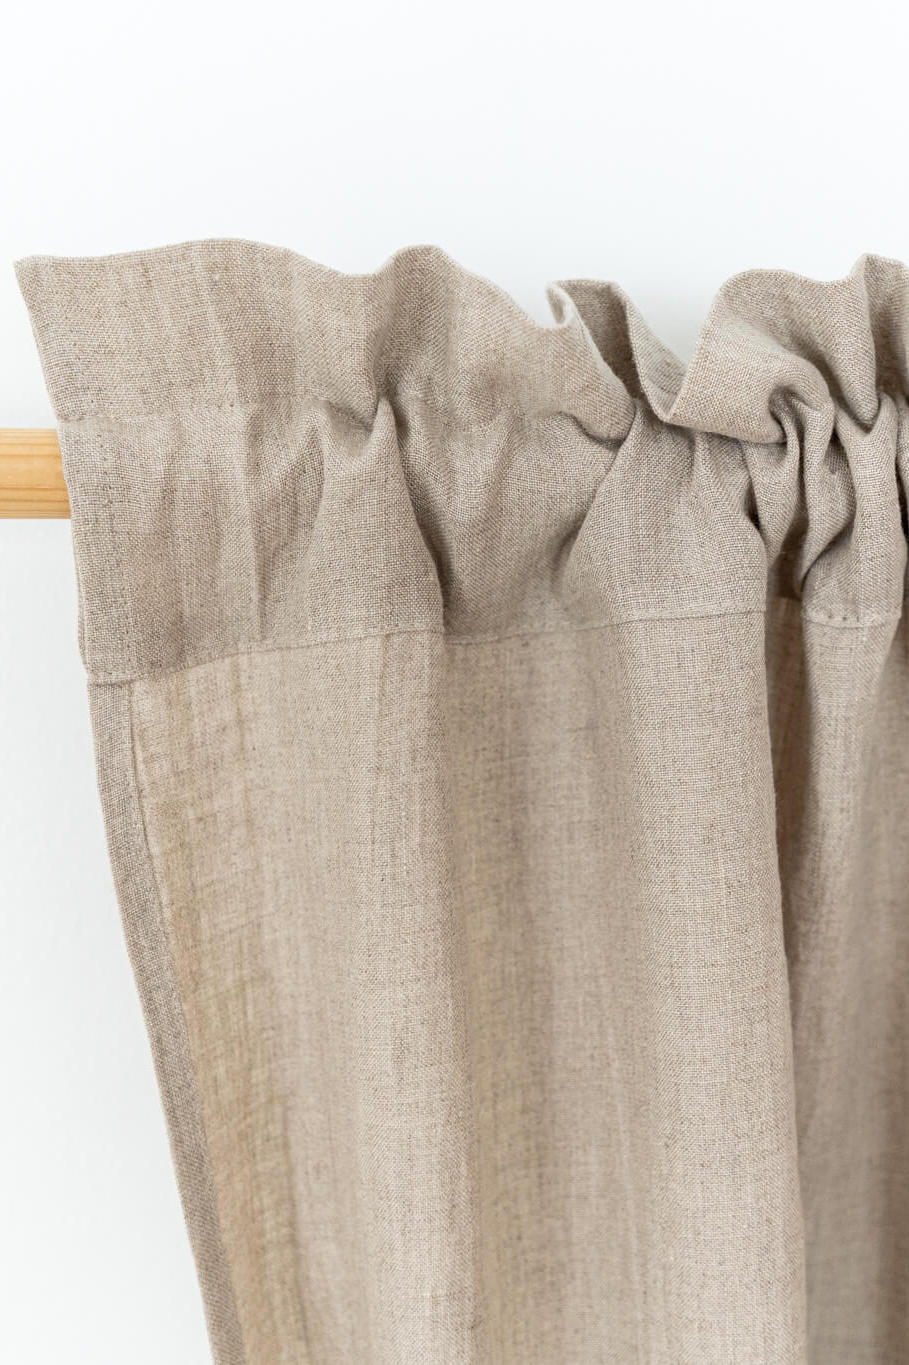 Set of 2 linen curtains with rod pocket and header on the top in various colors (1pair)